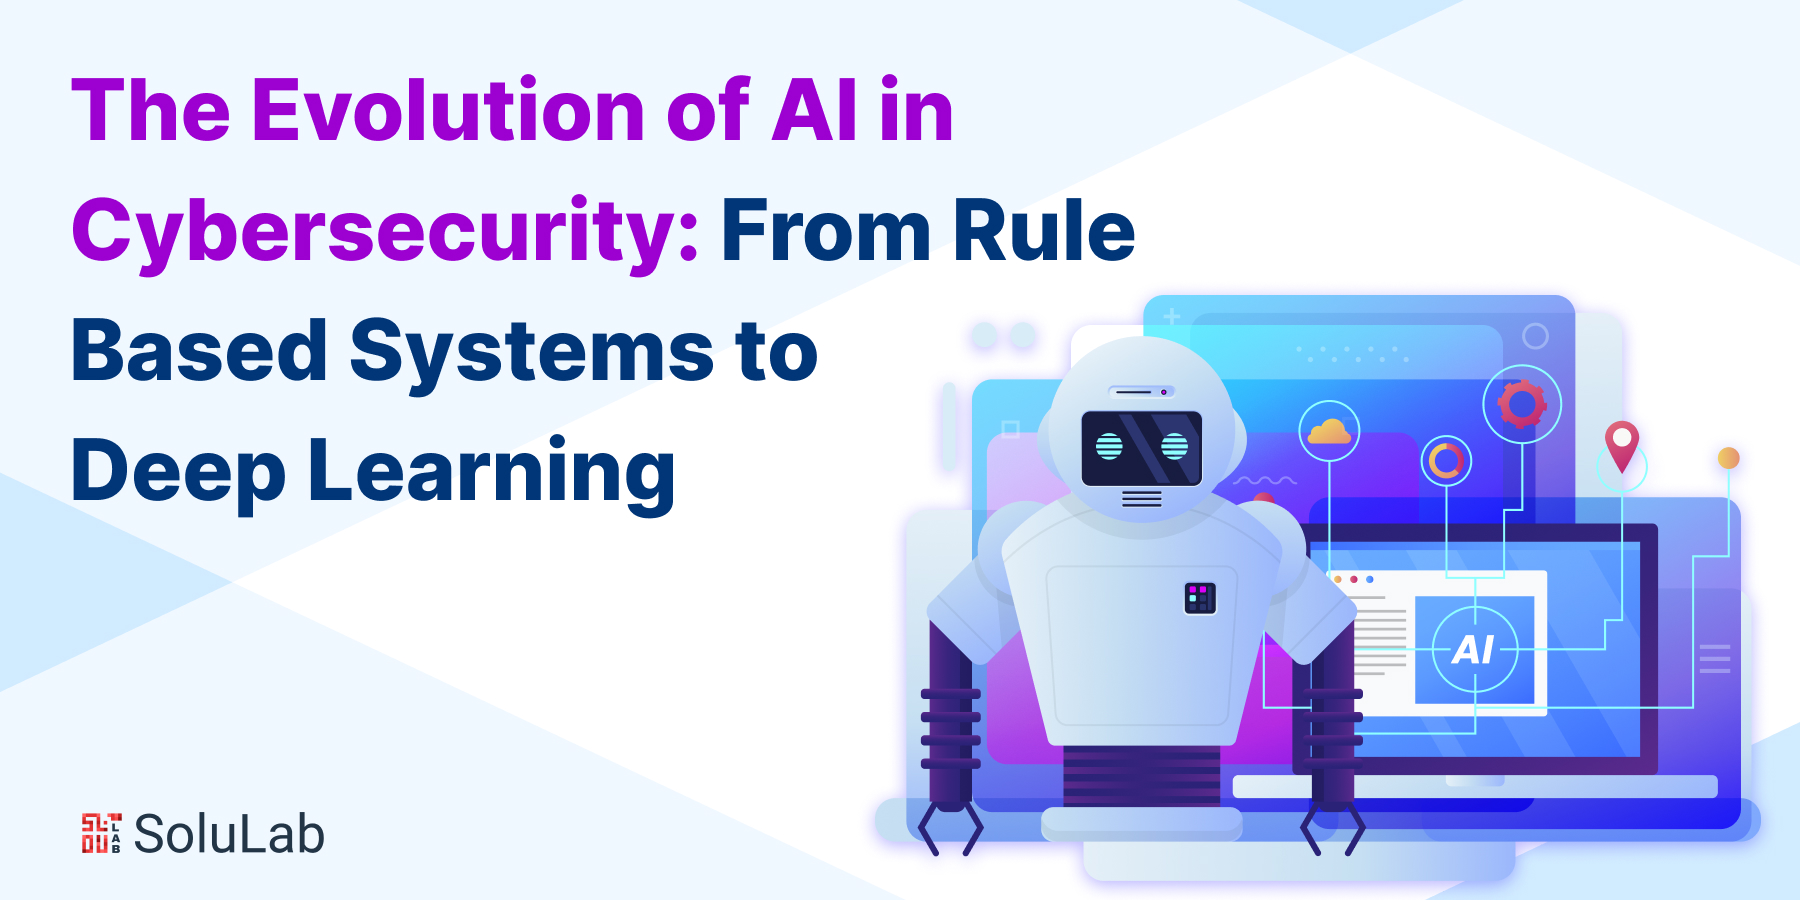 The Evolution of AI in Cybersecurity: From Rule Based Systems to Deep Learning